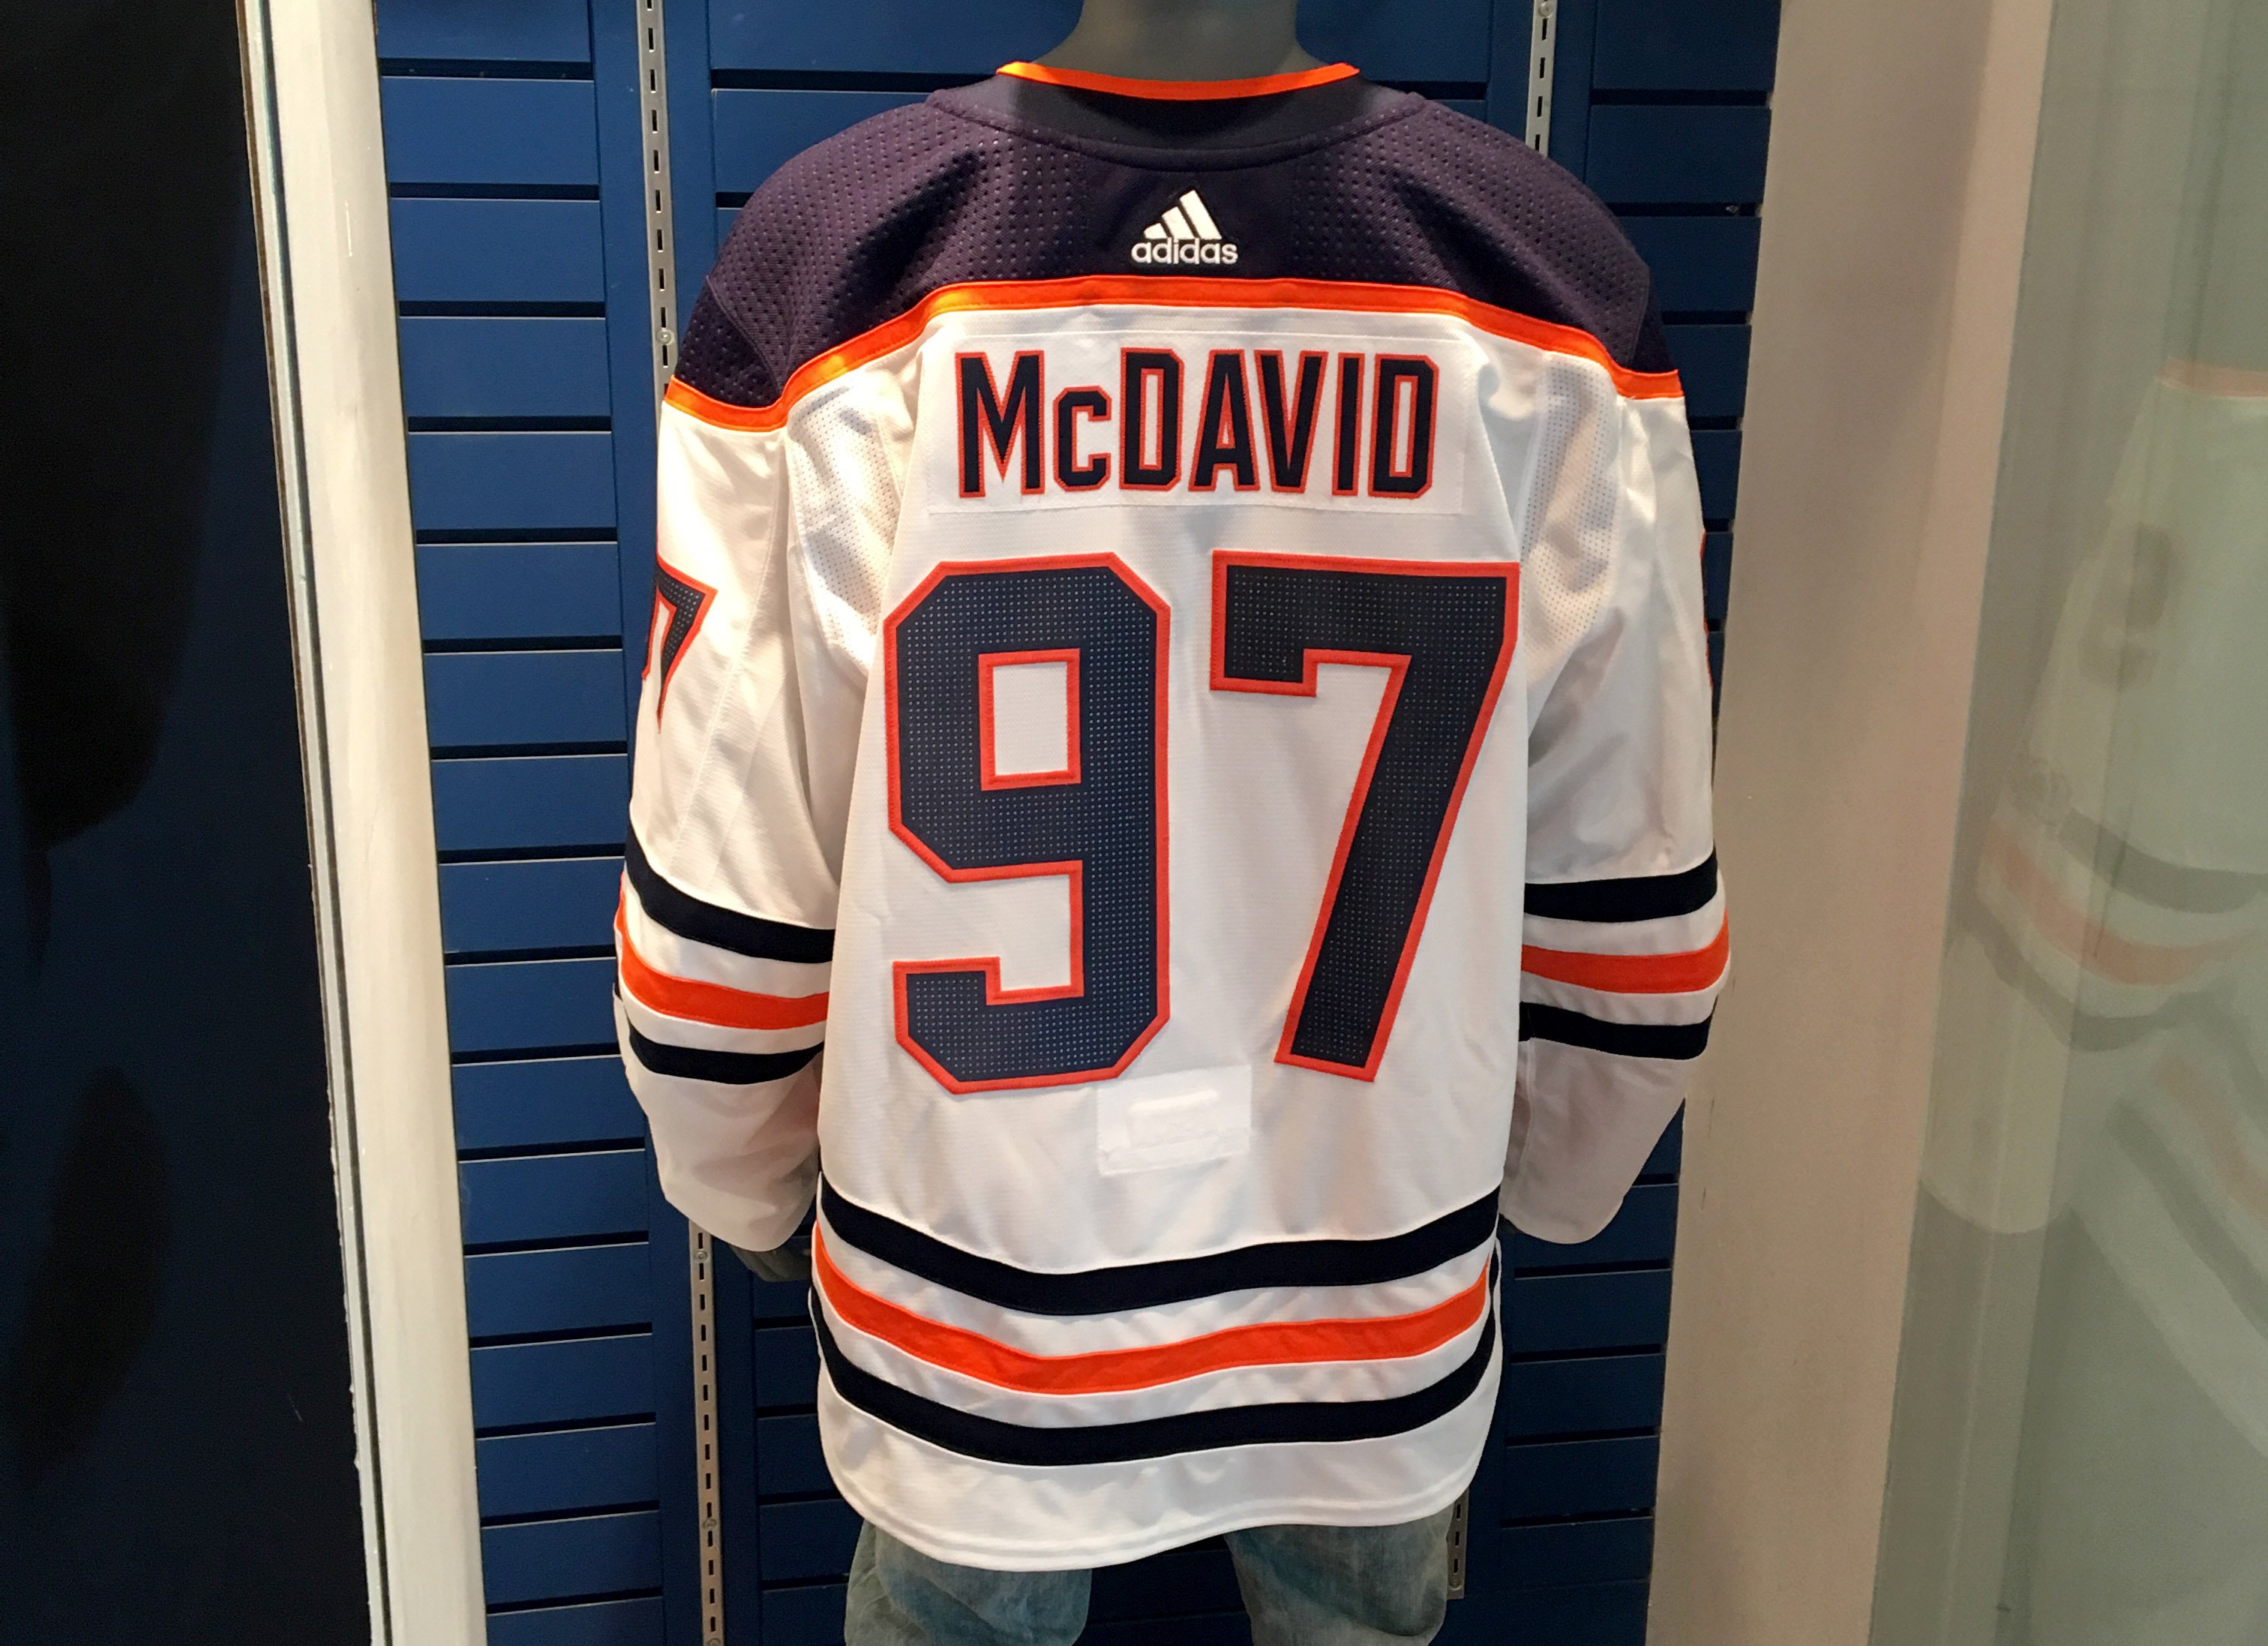 Edmonton Oilers - The #Oilers Store in Kingsway Mall will be open